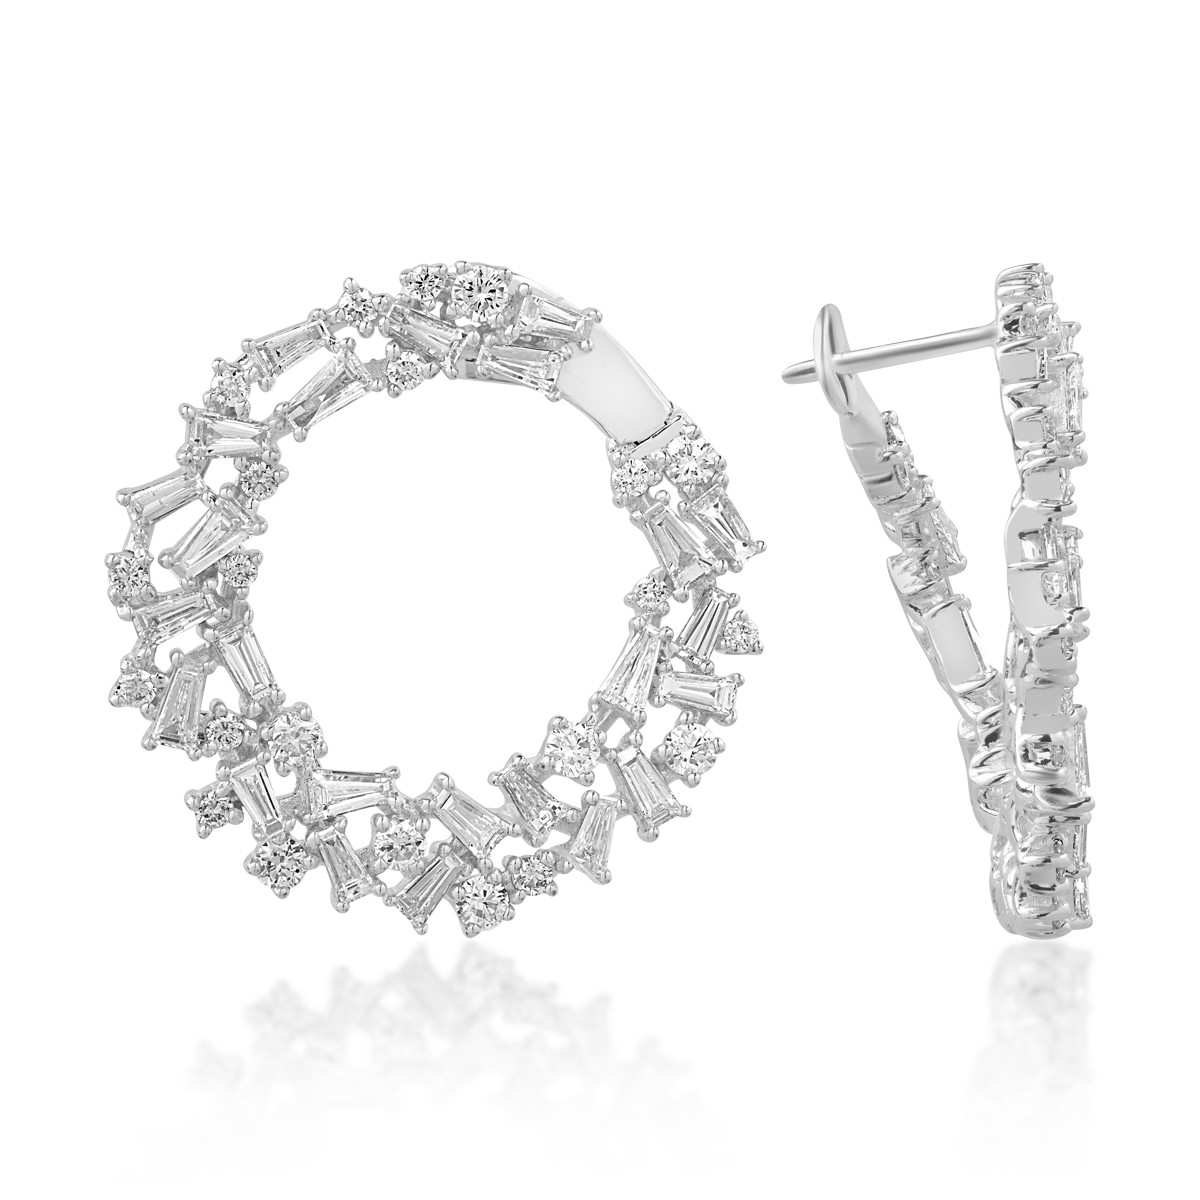 18K white gold earrings with 3.05ct diamonds